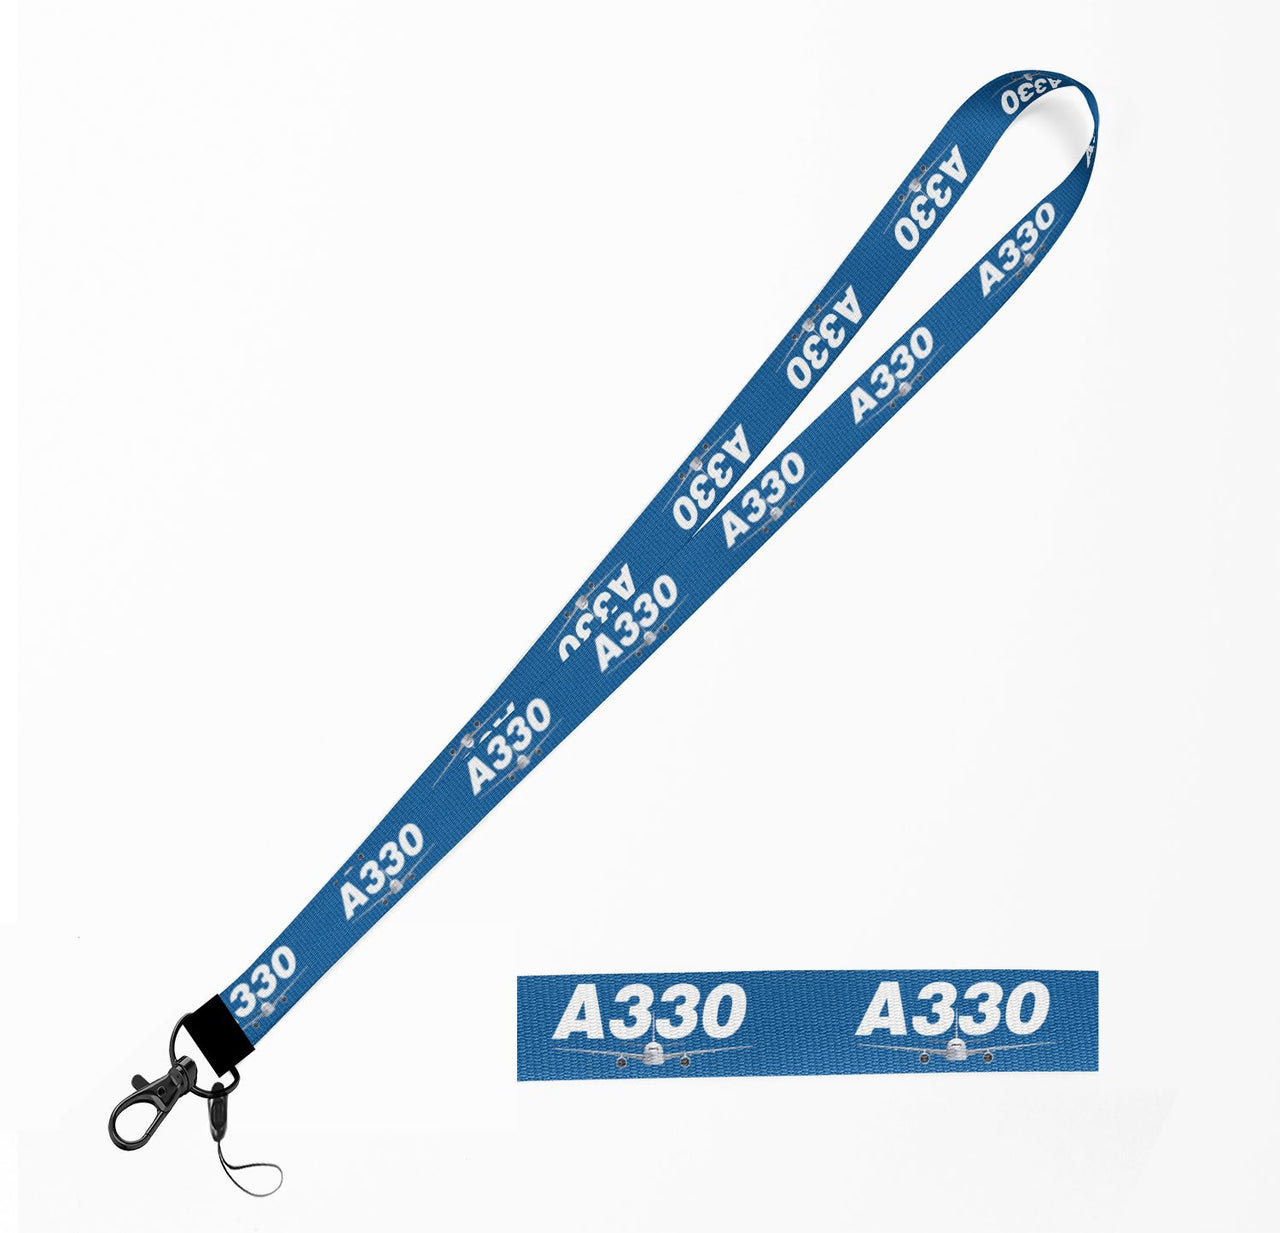 Super Airbus A330 Designed Lanyard & ID Holders